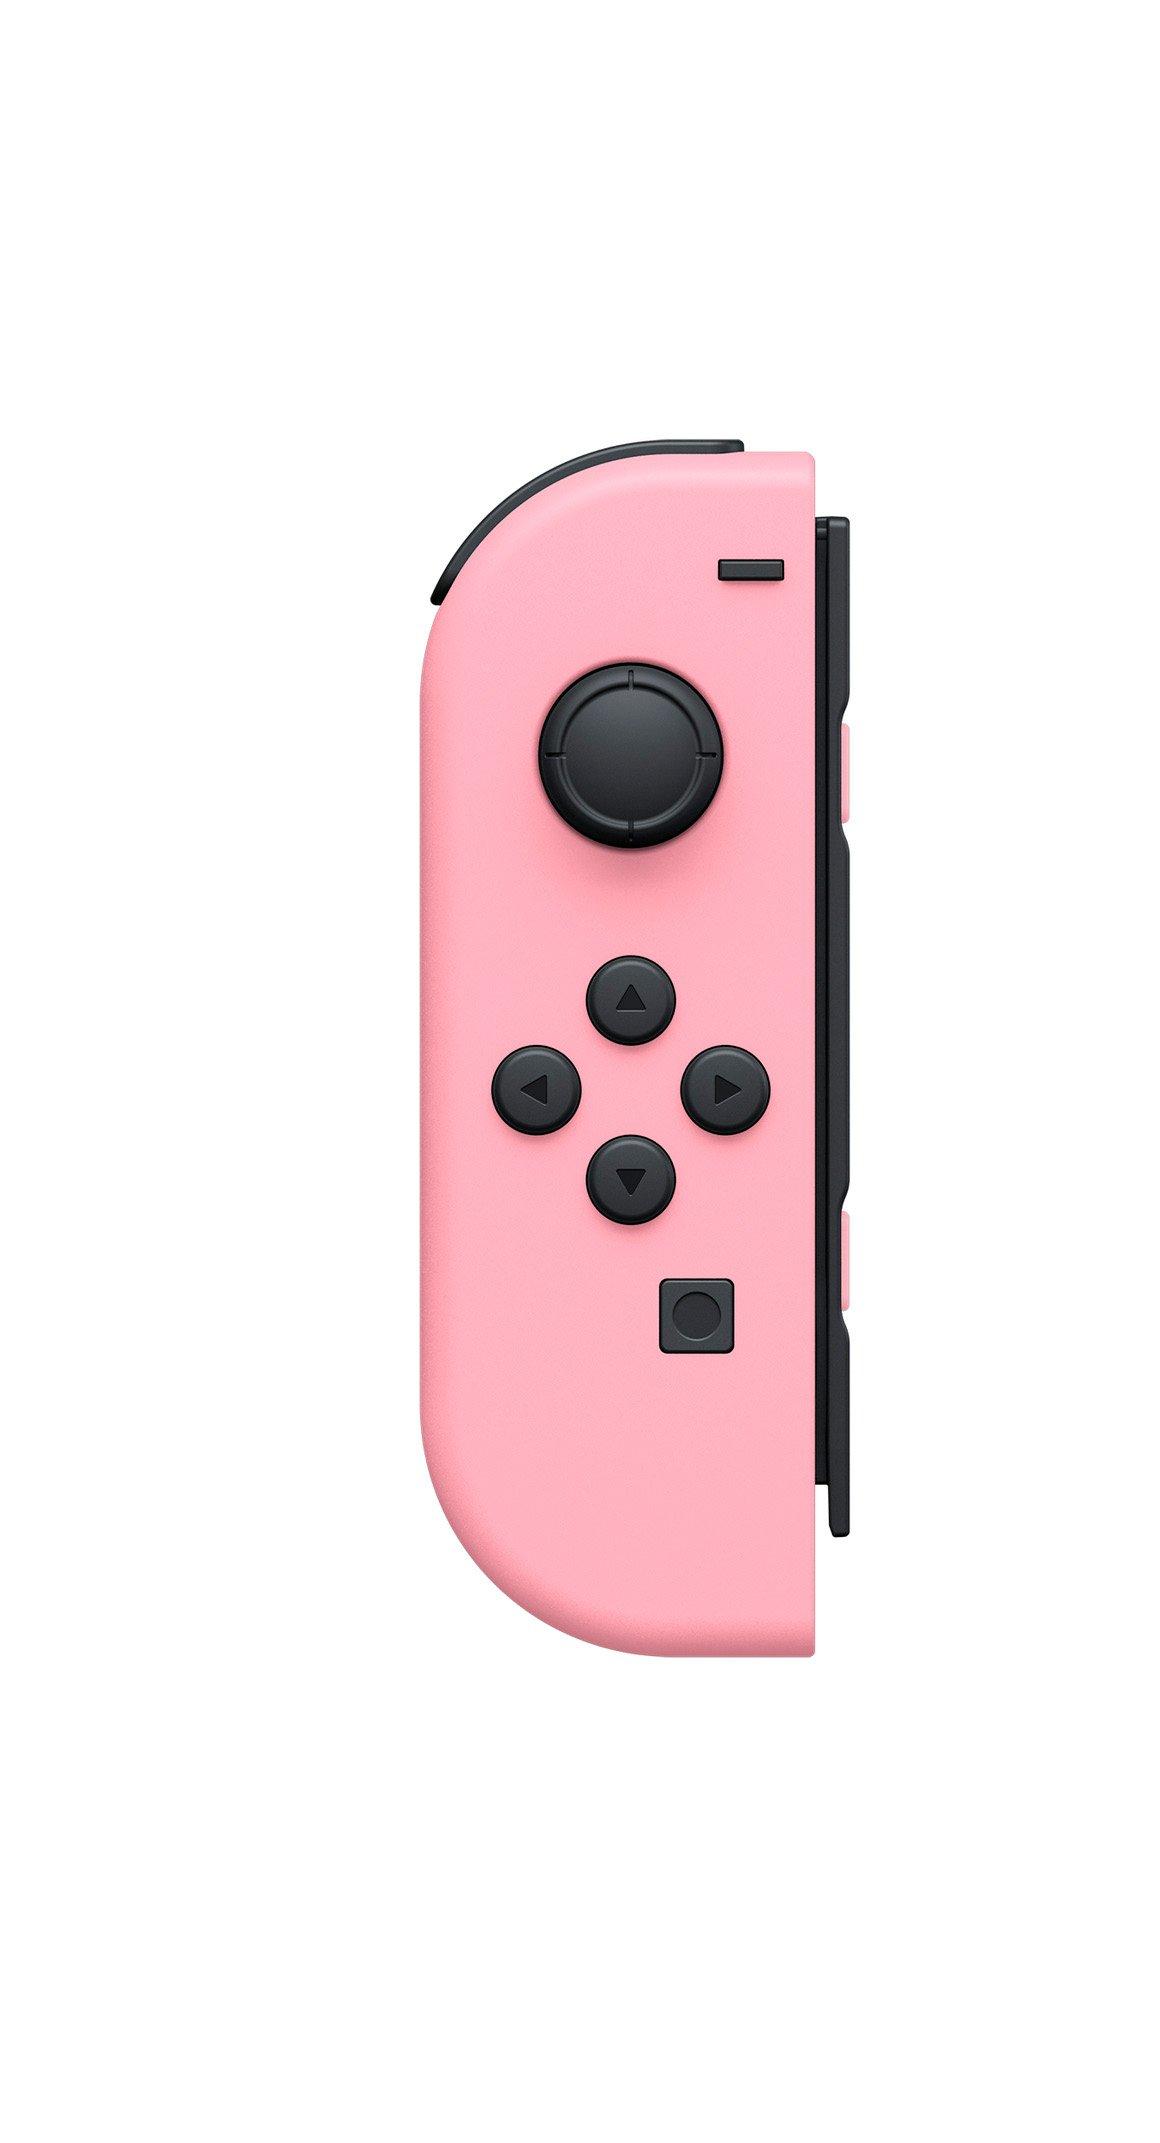 Nintendo Switch Joy-Con Controllers - Left and Right - Neon Pink/Neon Green